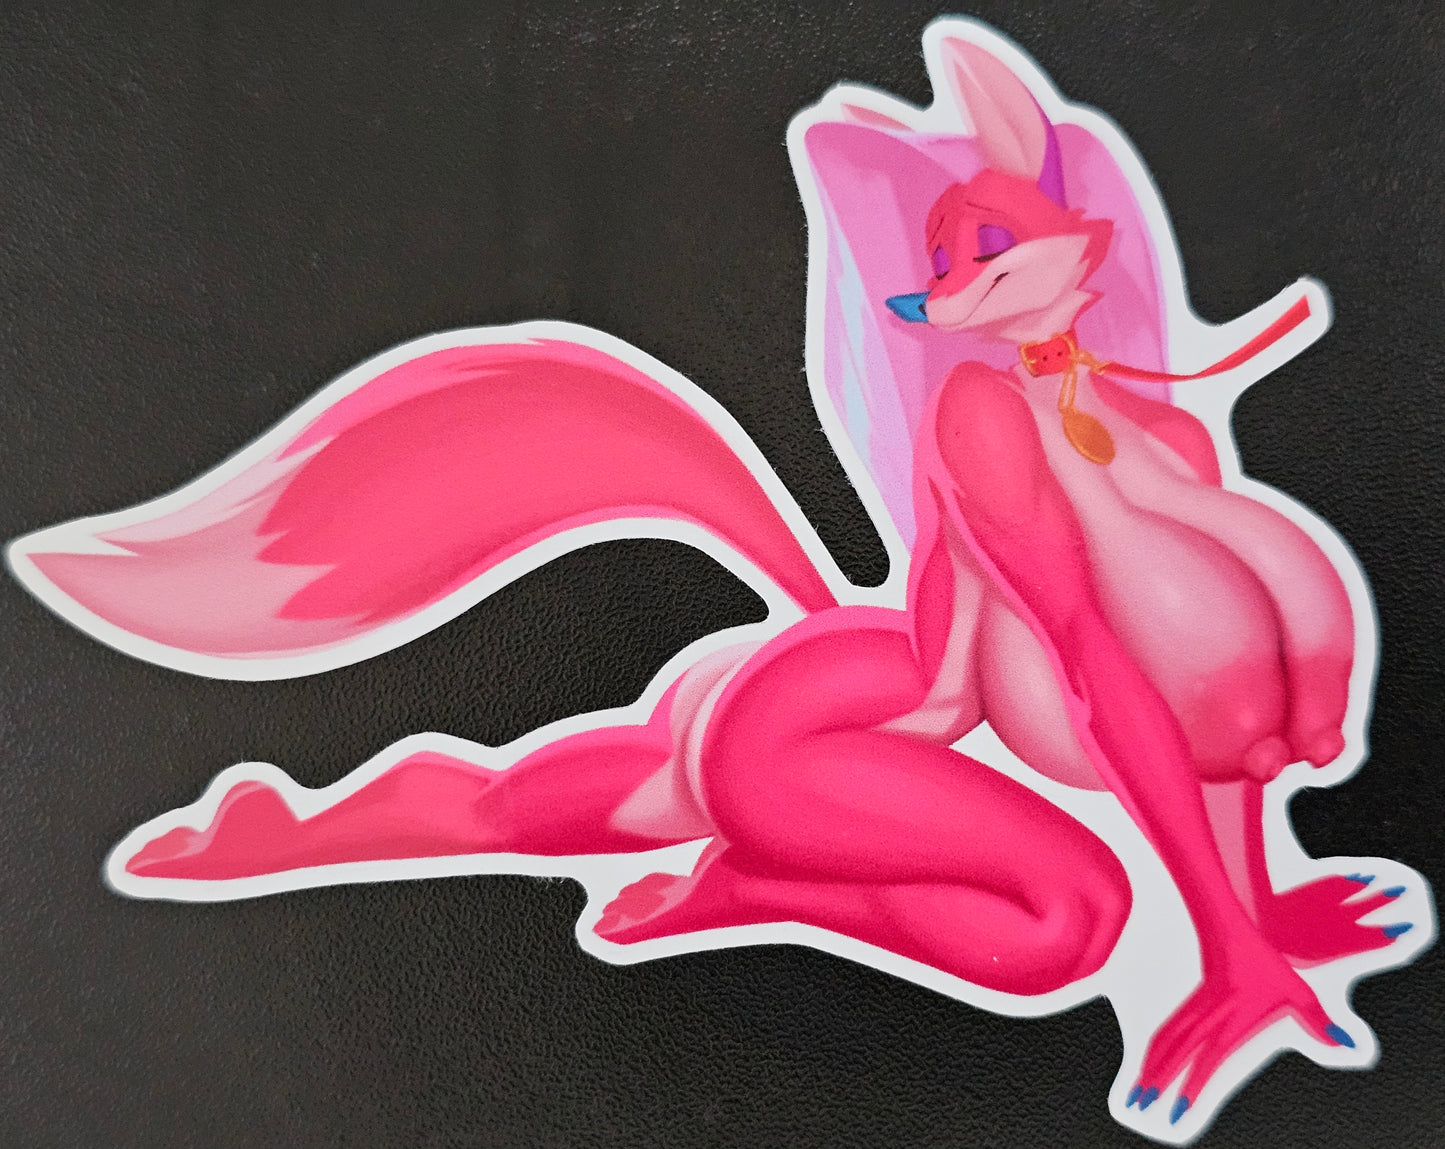 Cotton Candy Foxy's sticker pack 1